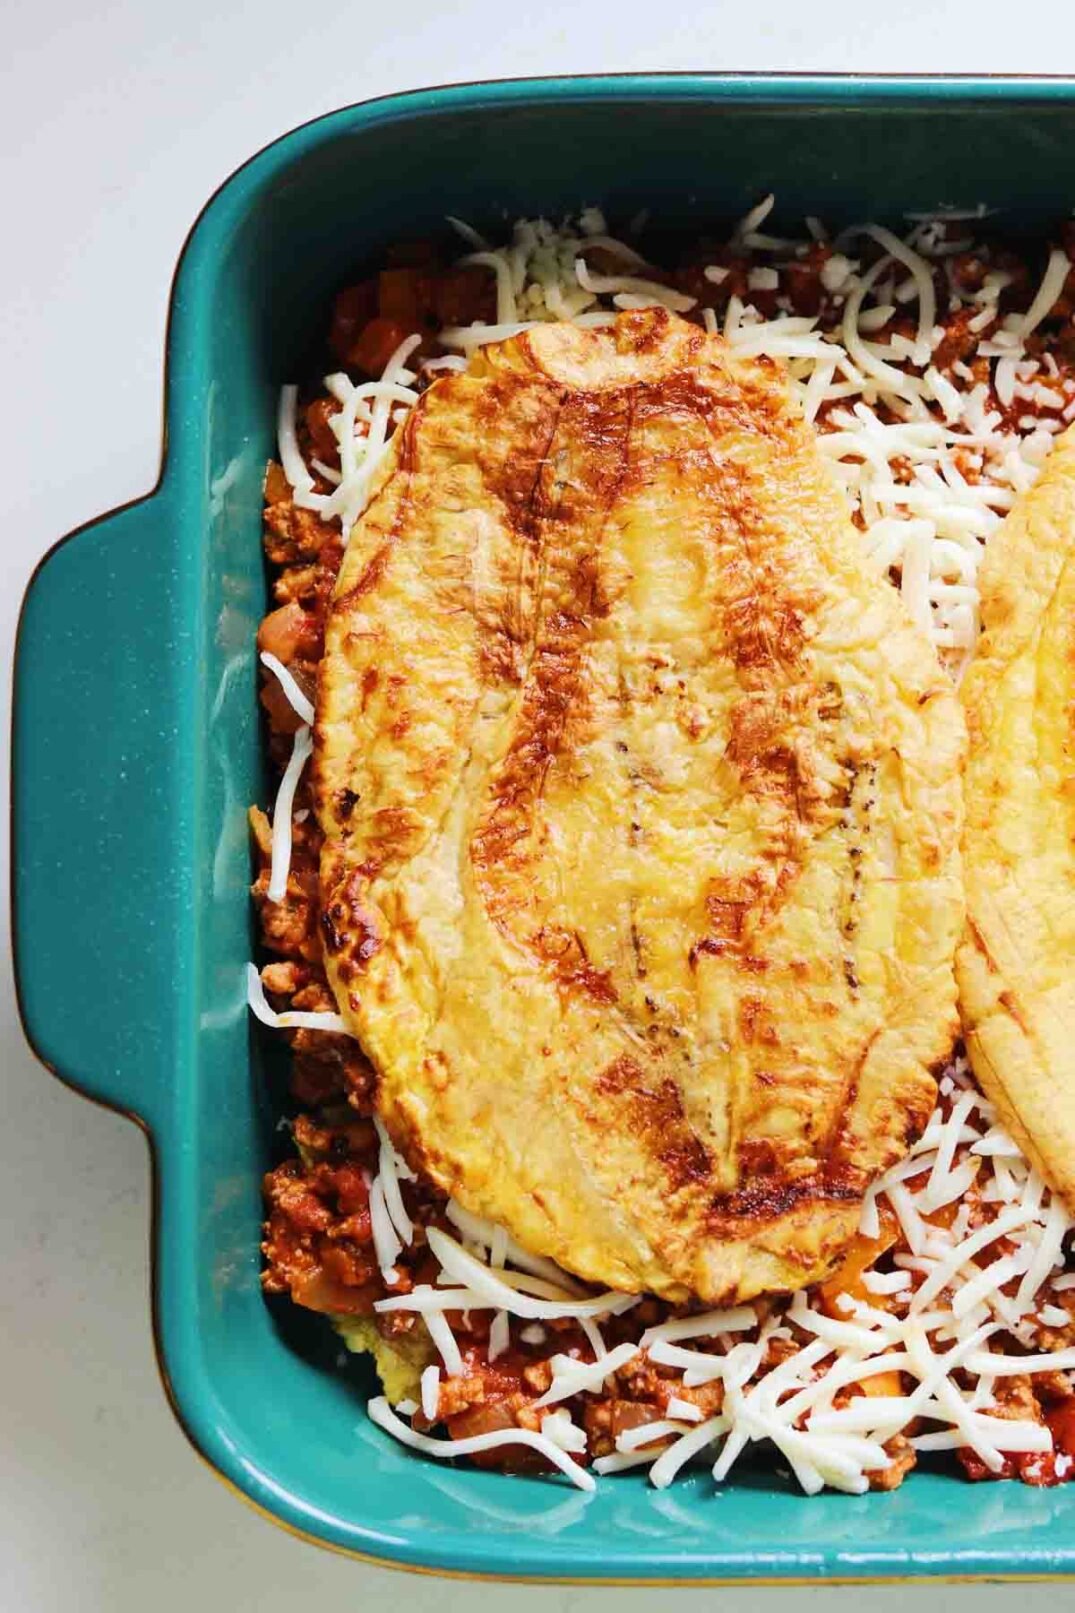 smashed plantains on top of meat and cheese in a blue baking dish.